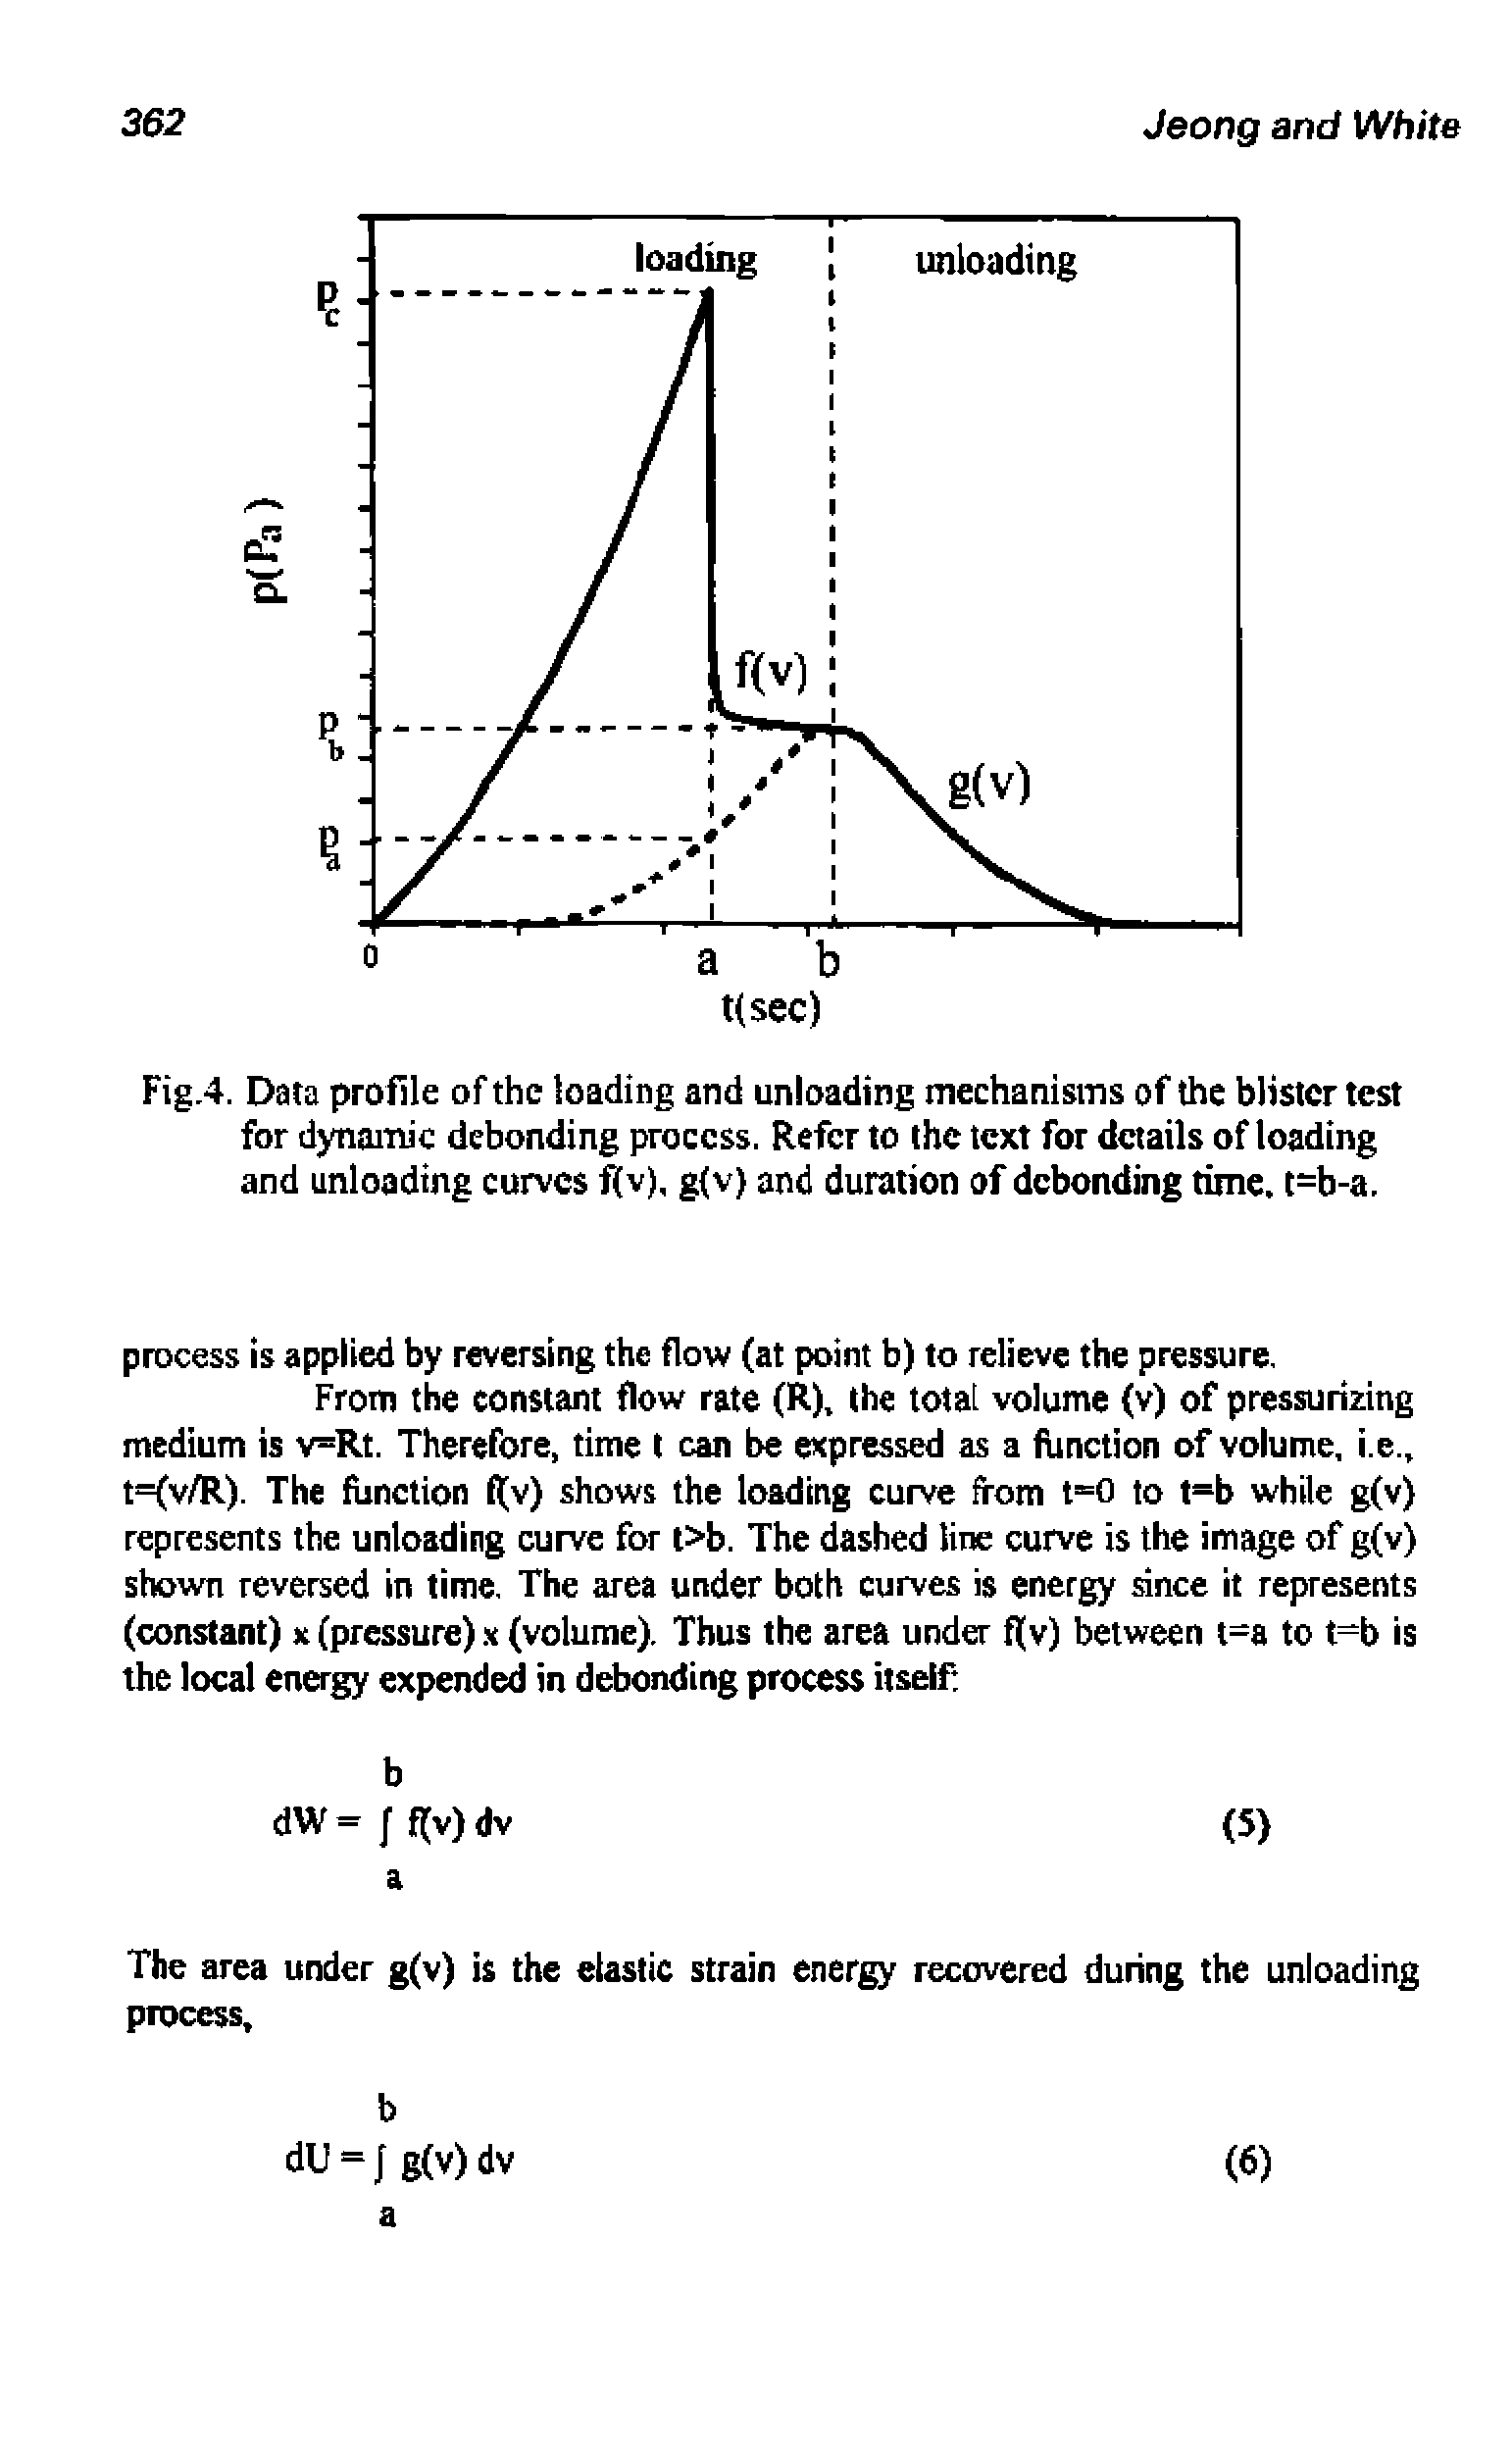 Fig.4. Data profile of the loading and unloading mechanisms of the blister test for dynamic debonding process. Refer to the text for details of loading and unloading curves ffv), g(v) and duration of debonding time. t=b-a.